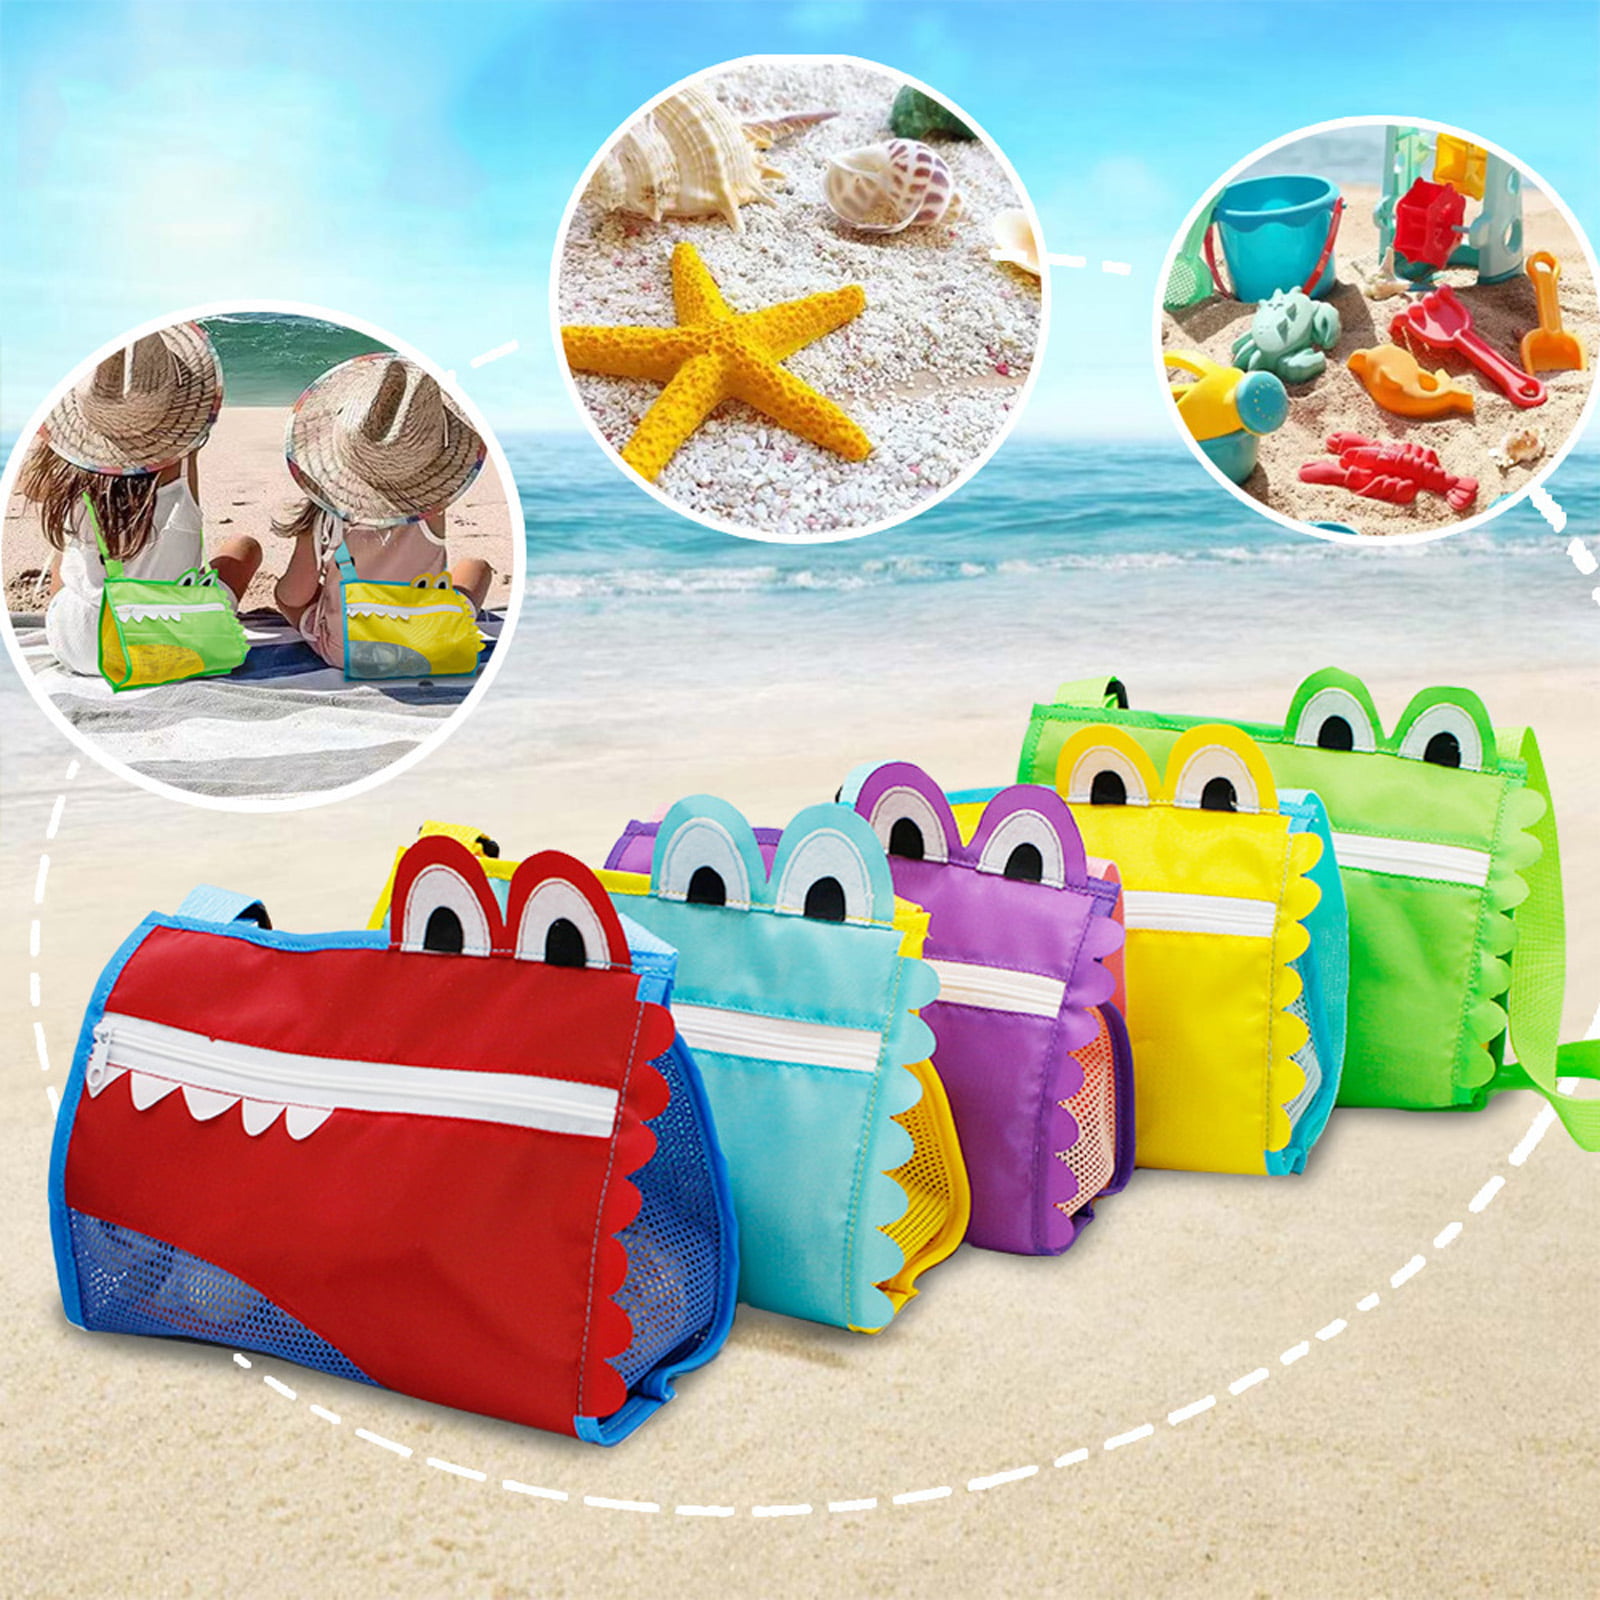 DAIKOYE Beach Toy Mesh Beach Bags - Kids Shell Collecting Bags Sand Toy  Totes with Adjustable Carryi…See more DAIKOYE Beach Toy Mesh Beach Bags -  Kids